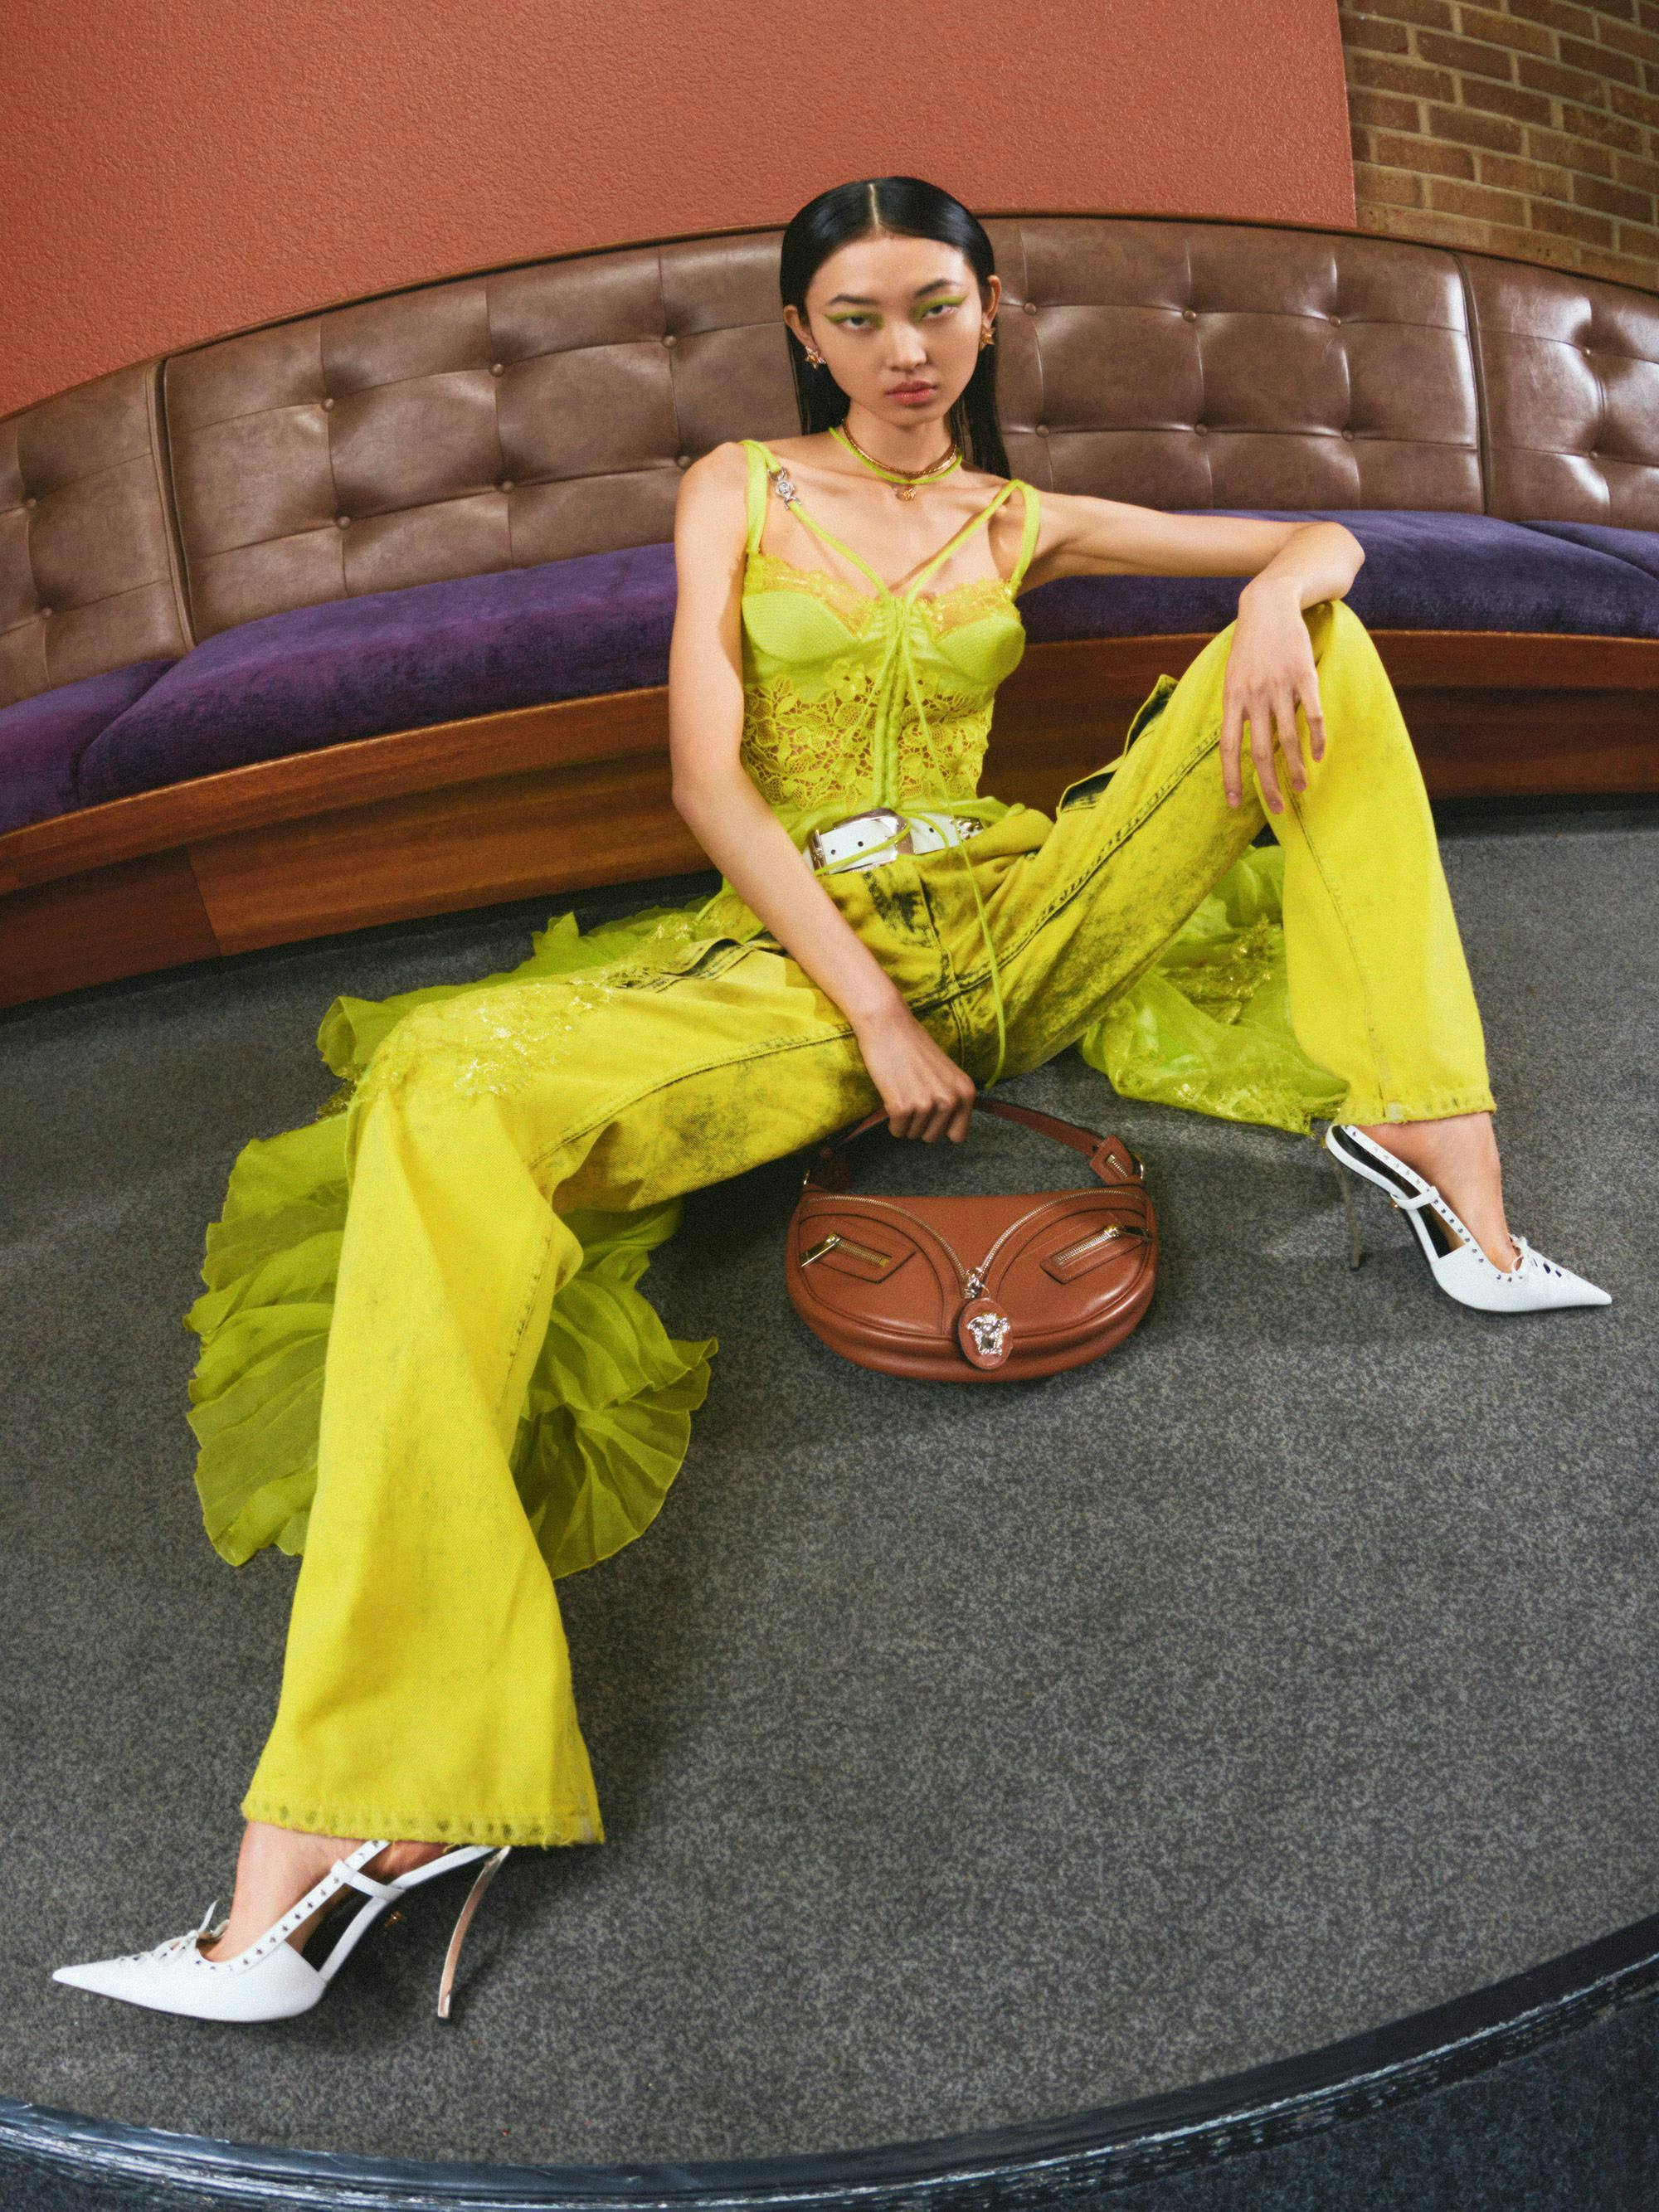 Model in lime green body suit and white heels.